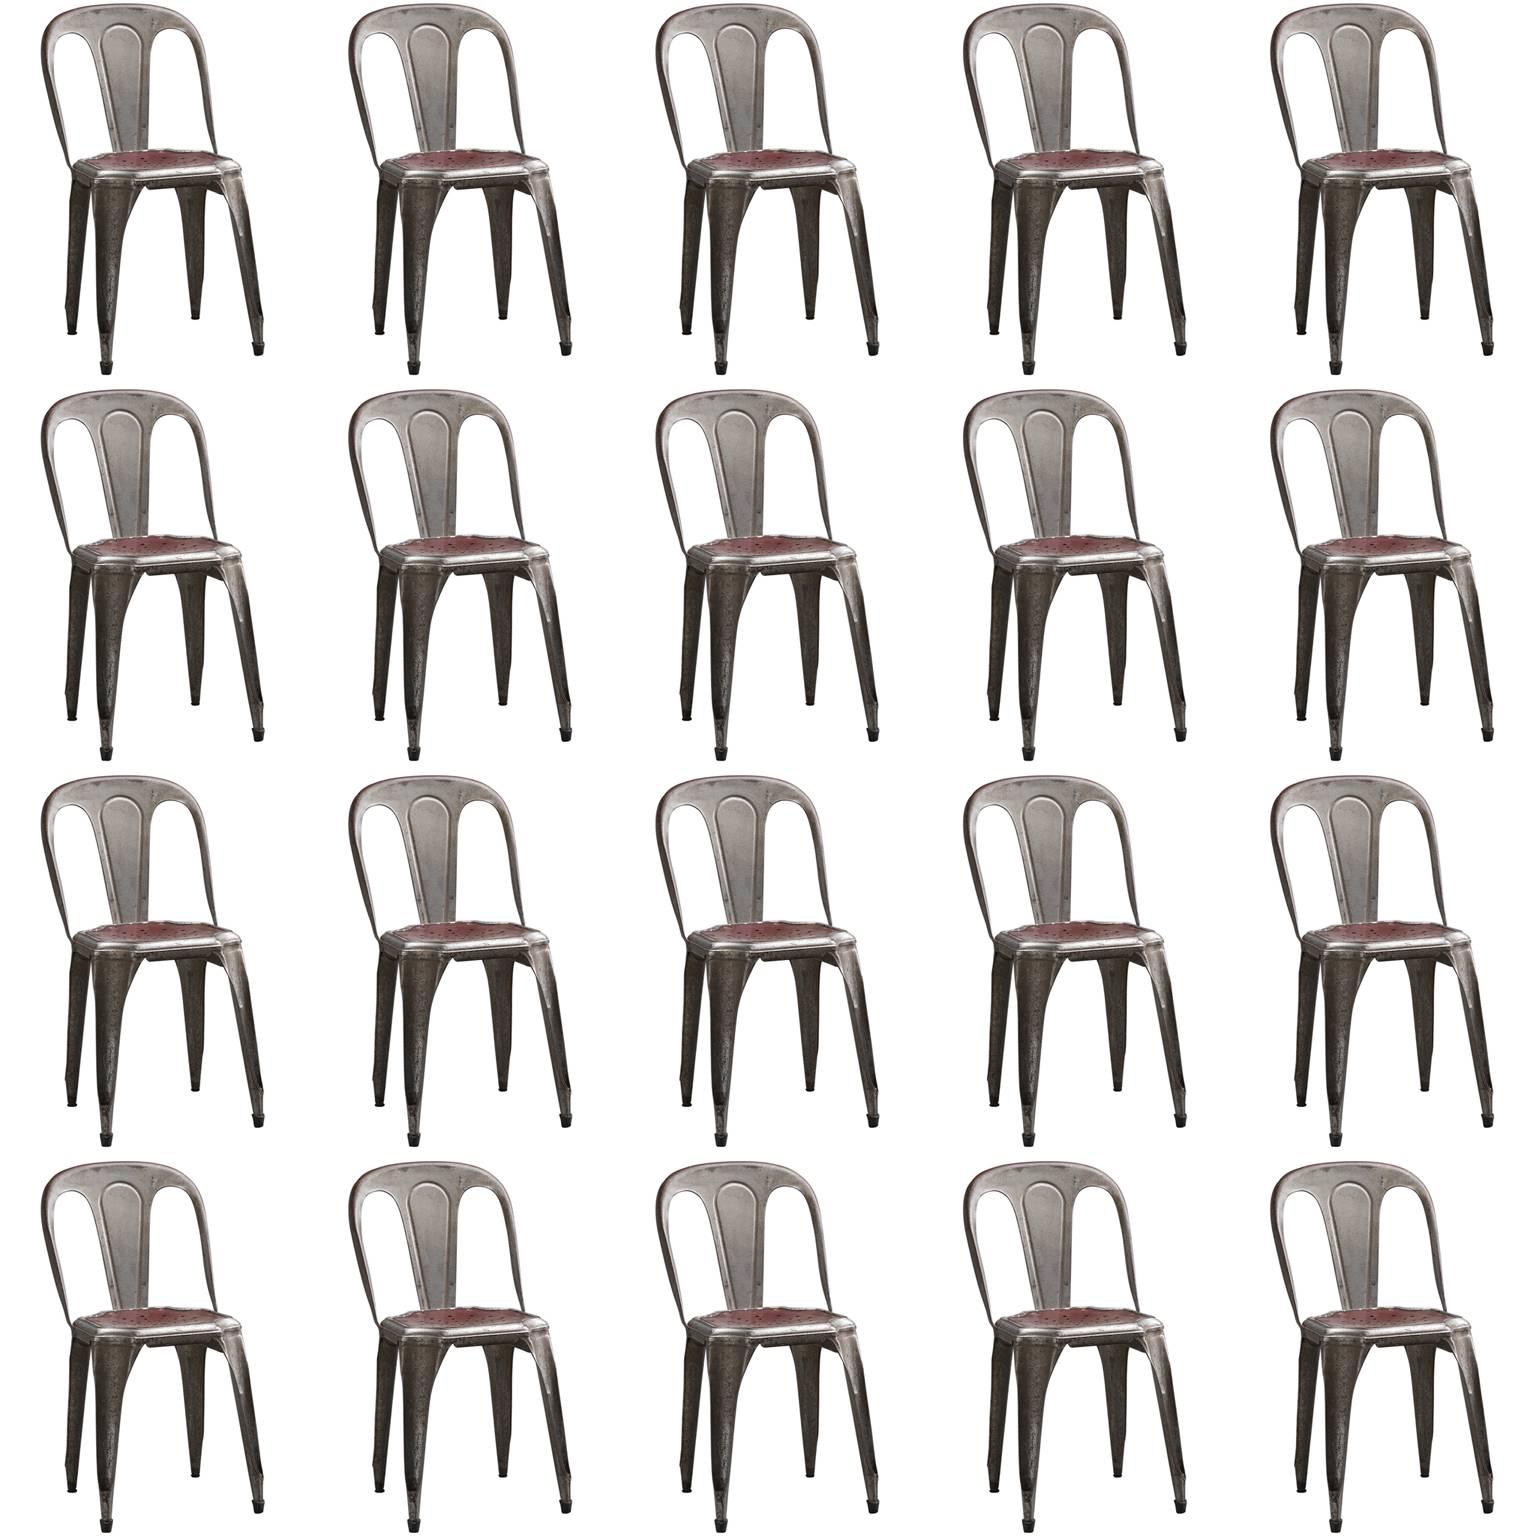 Large Set of Stackable Chairs by Fibrocit Bruxelles, Belgium 1950s